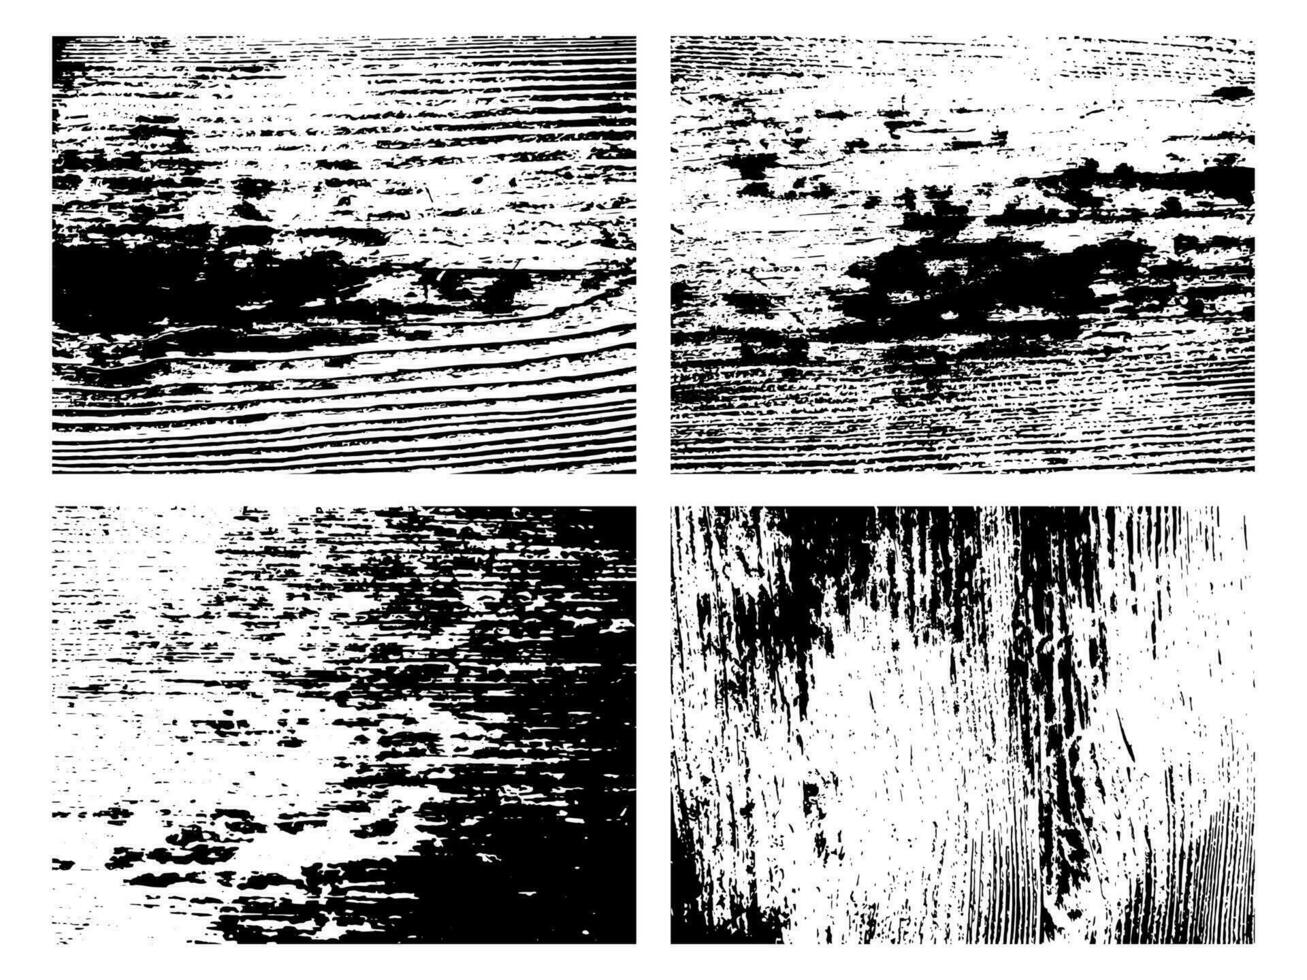 Grunge natural wood monochrome texture. Set of four abstract wooden surface overlay backgrounds in black and white. Vector illustration